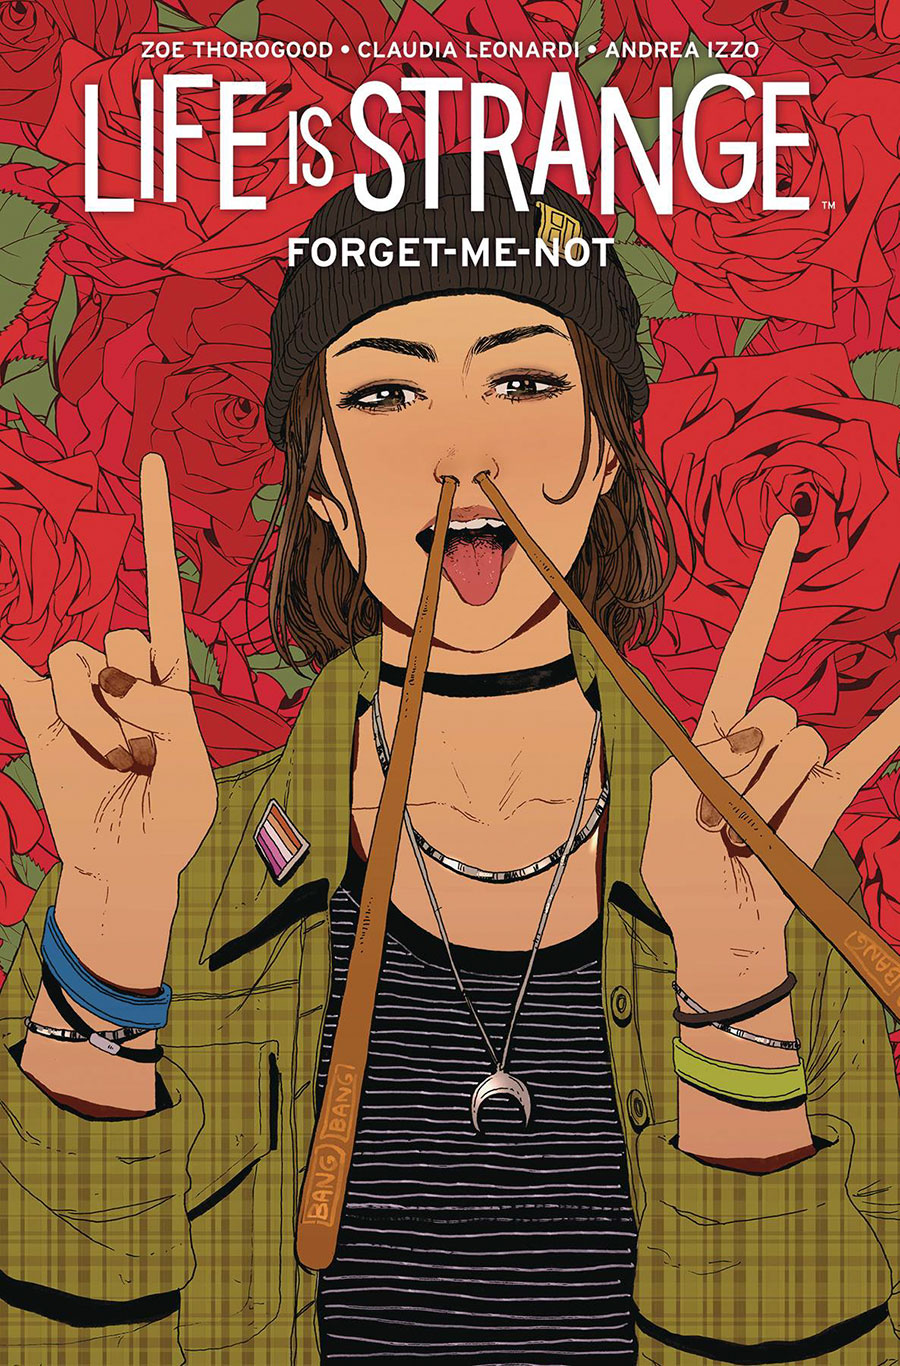 Life Is Strange Forget-Me-Not #3 Cover B Variant Zoe Thorogood Cover